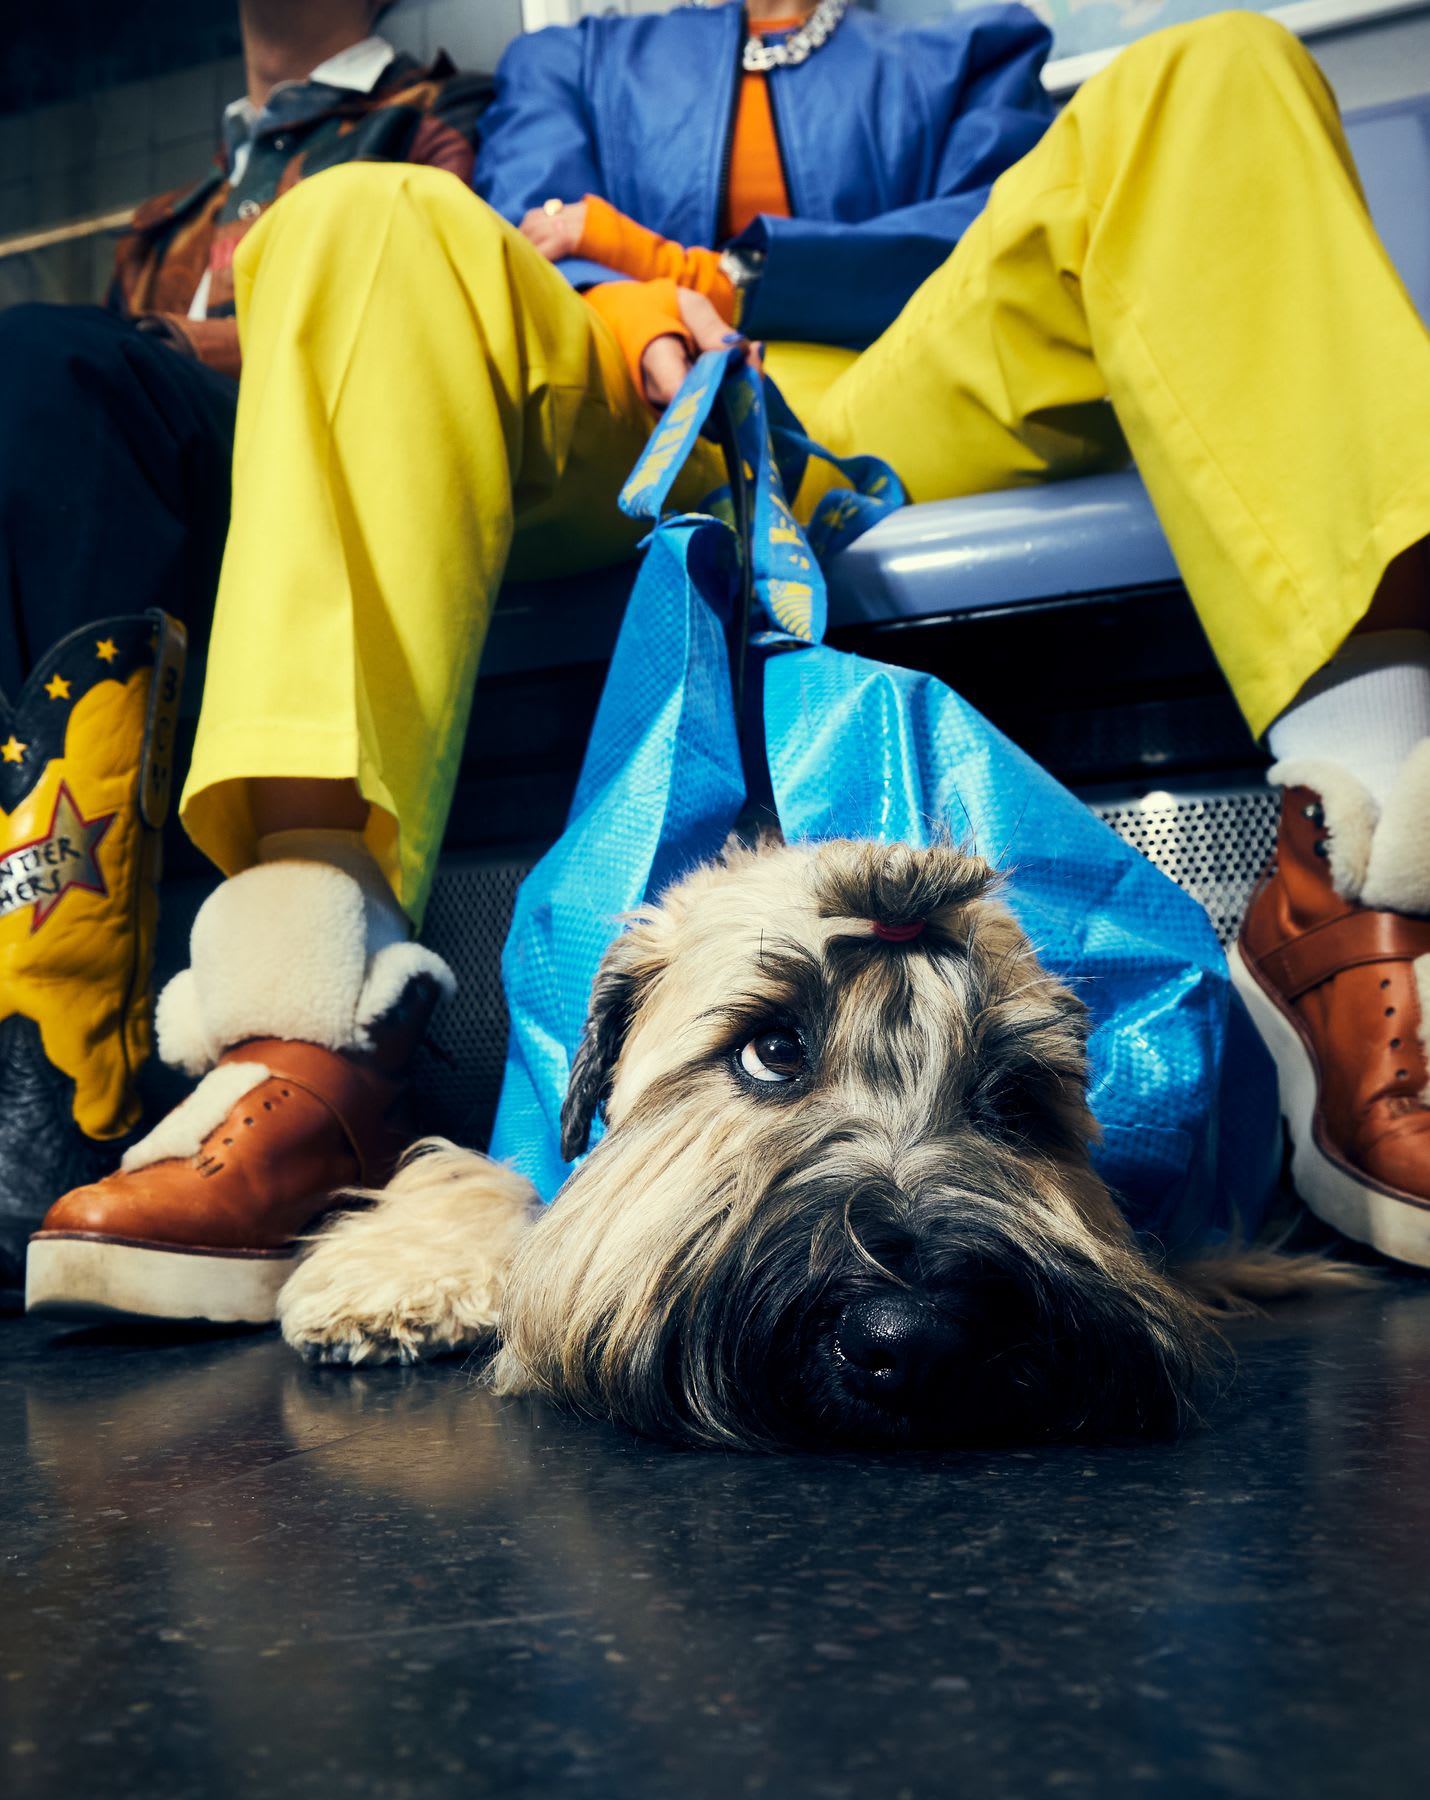 A dog rests on the floor of a subway car between the feet of a man wearing bright clothing.